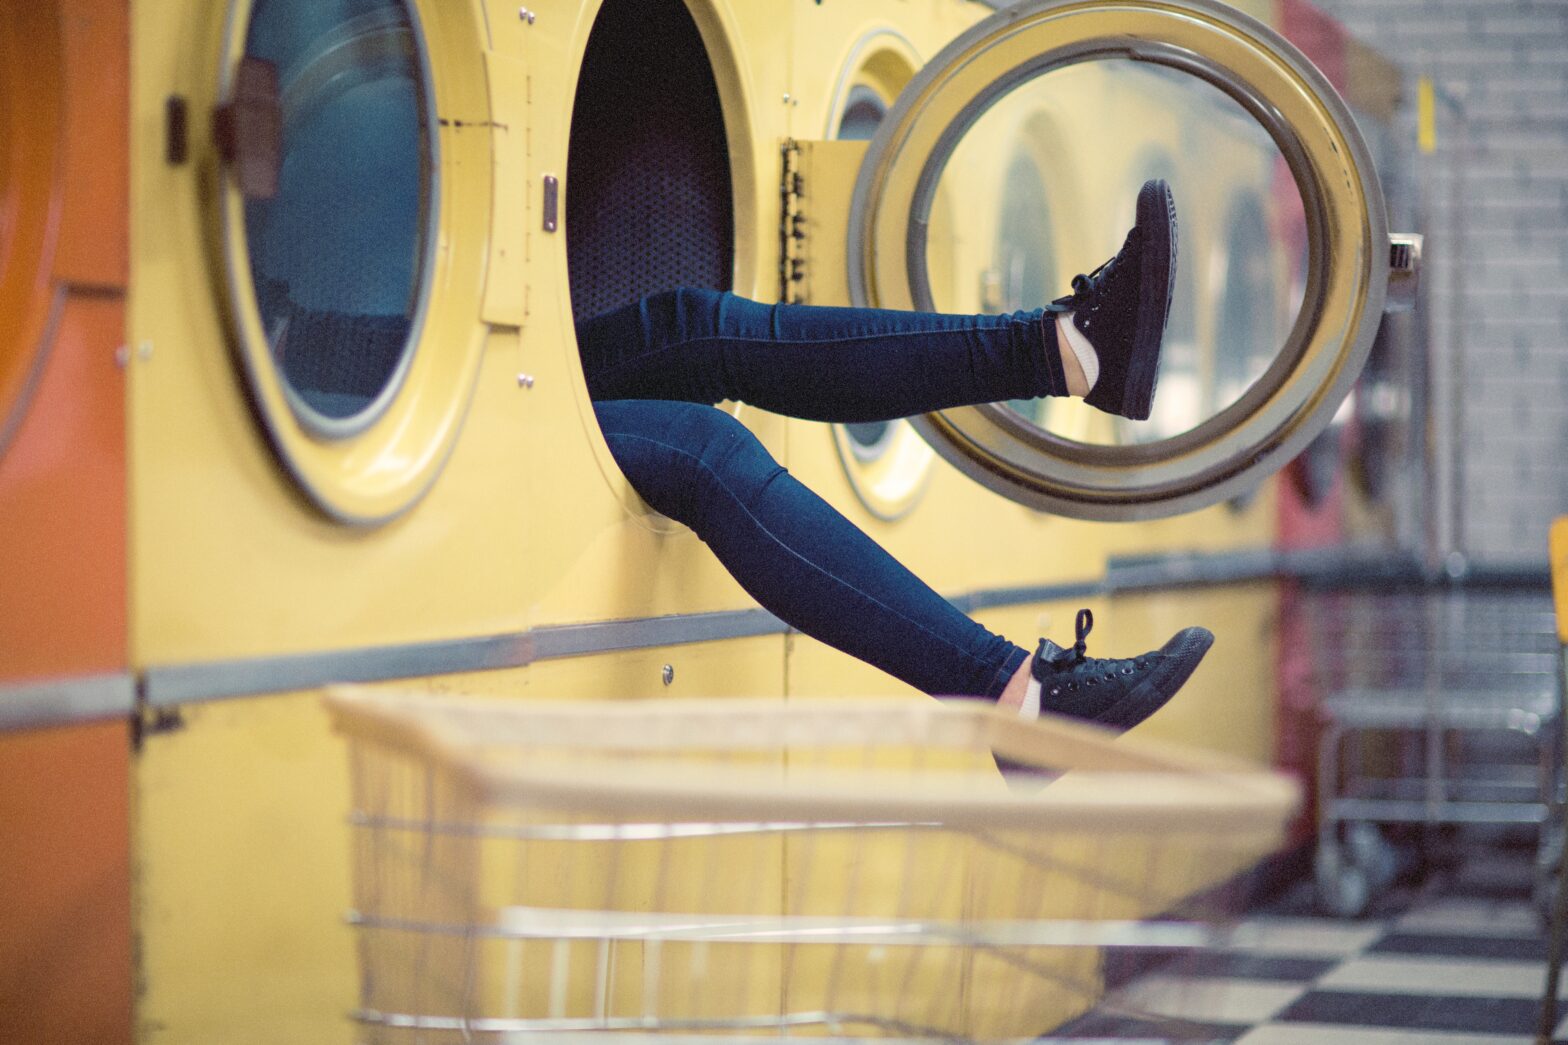 Someone falling into a laundromat washing machine - image by Pexels from Pixabay